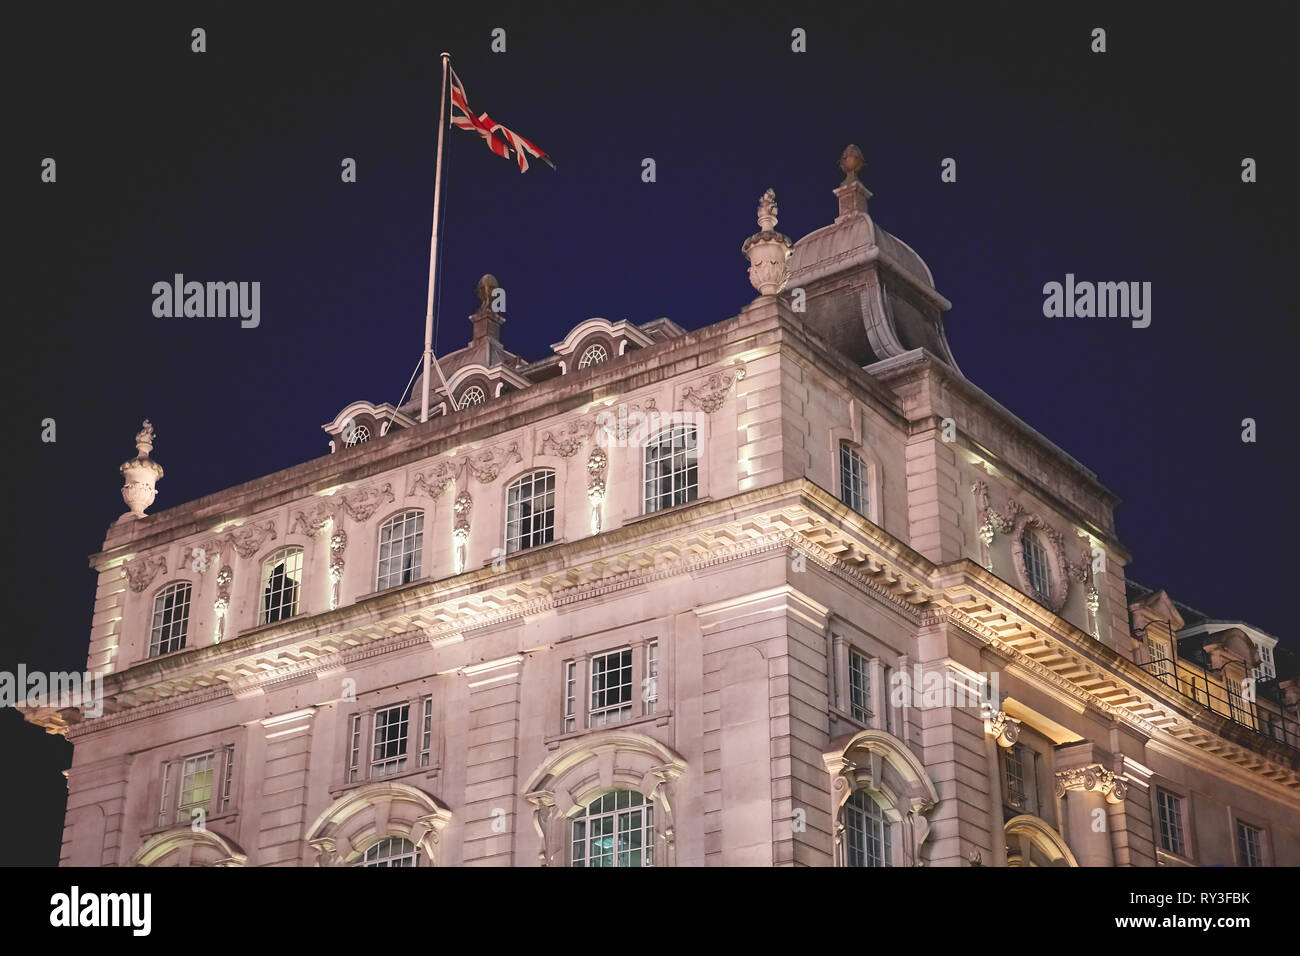 London, UK - August, 2018. View of a historic building facing Piccadilly Circus at night. Stock Photo